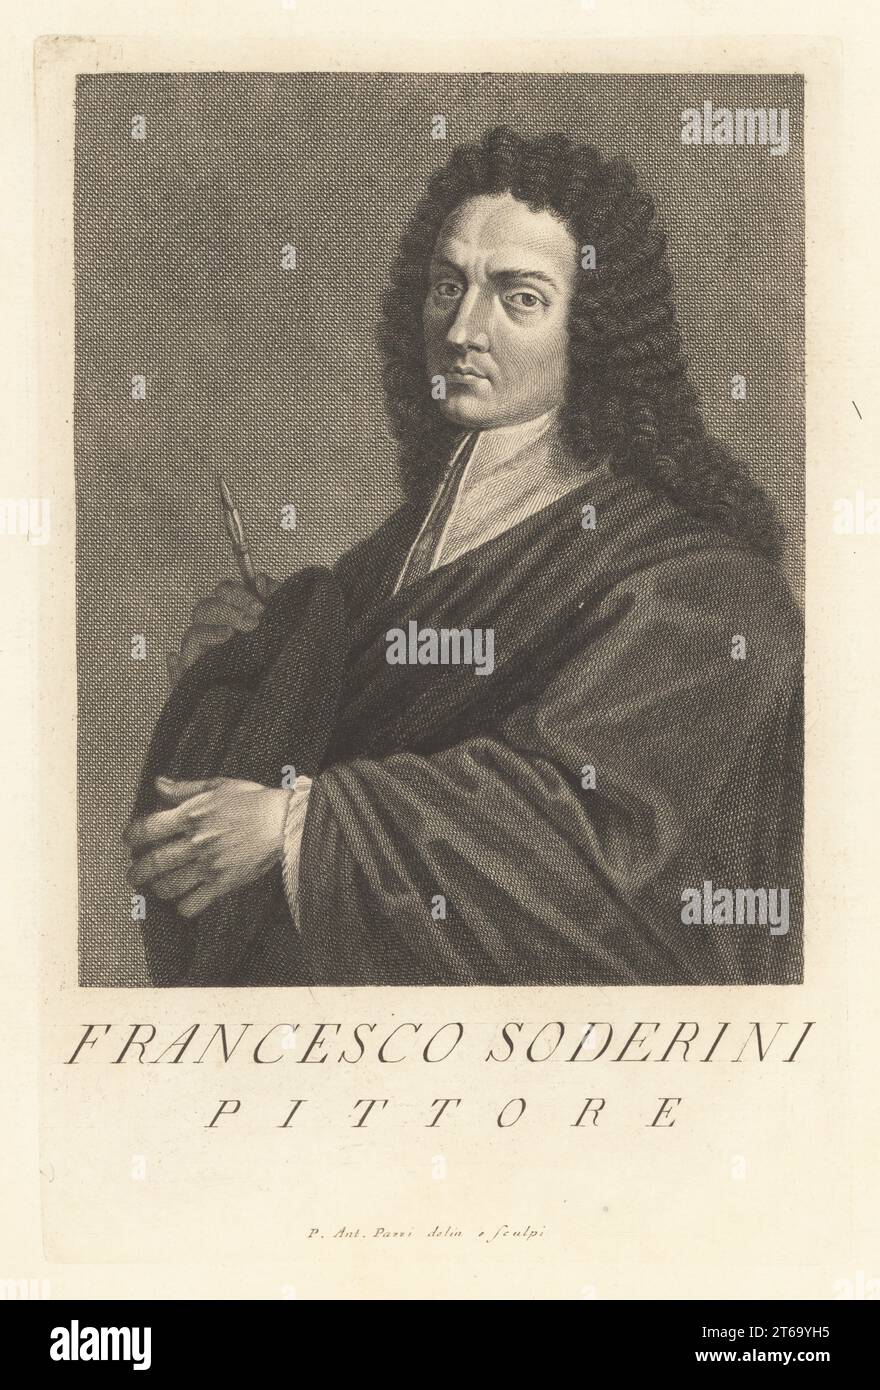 Francesco Soderini, Florentine painter, 1671-1736. Worked for the last members of the Medici dynasty. Pittore. Copperplate engraving drawn and engraved by Pietro Antonio Pazzi after a self portrait by the artist from Francesco Moucke's Museo Florentino (Museum Florentinum), Serie di Ritratti de Pittori (Series of Portraits of Painters) stamperia Mouckiana, Florence, 1752-62. Stock Photo